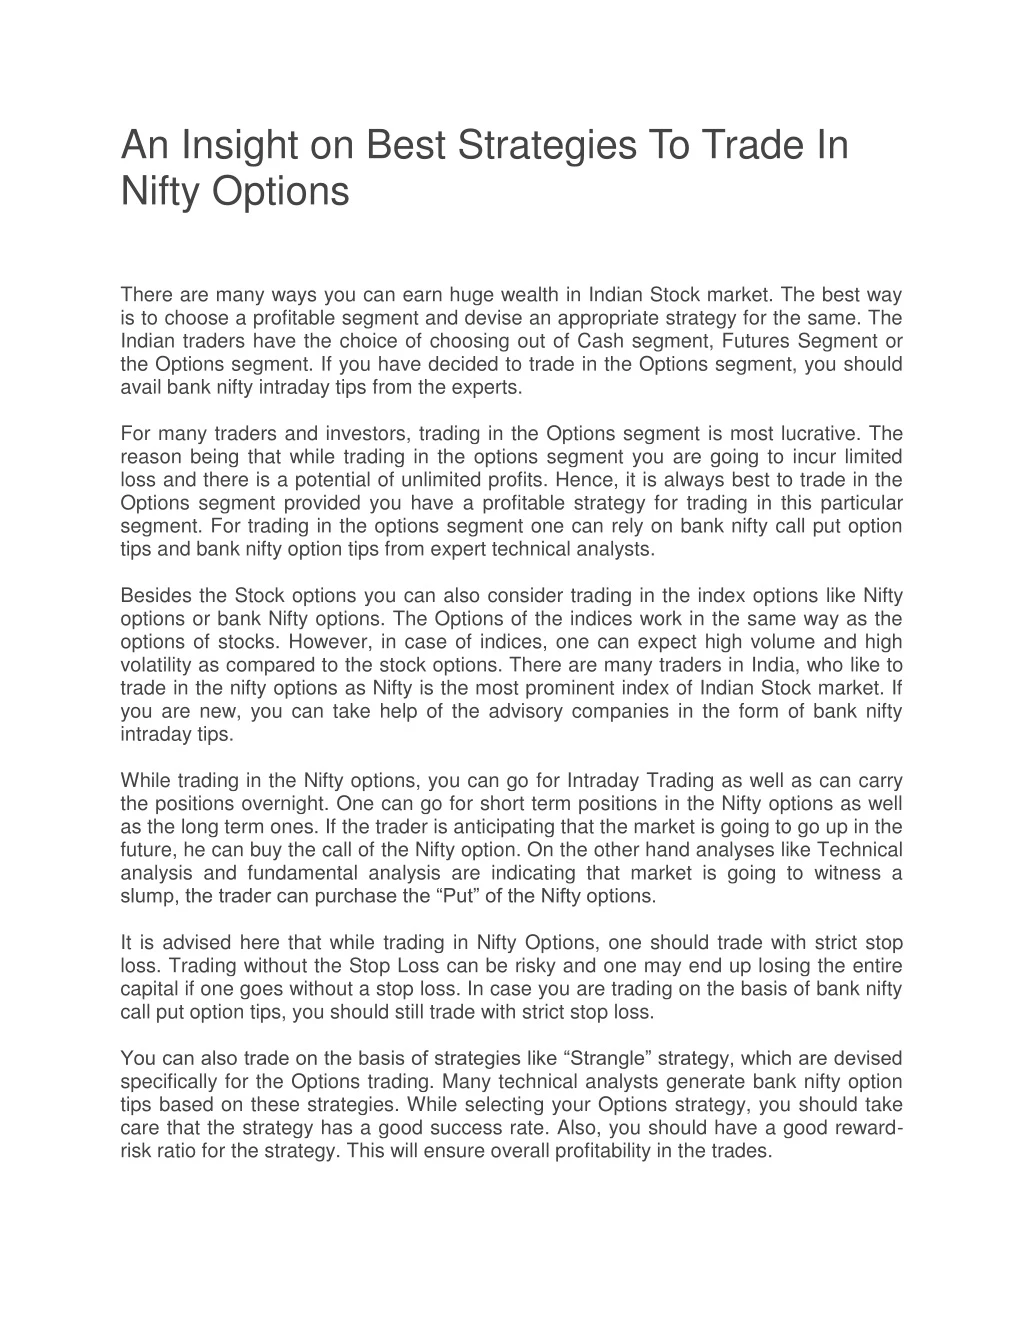 an insight on best strategies to trade in nifty